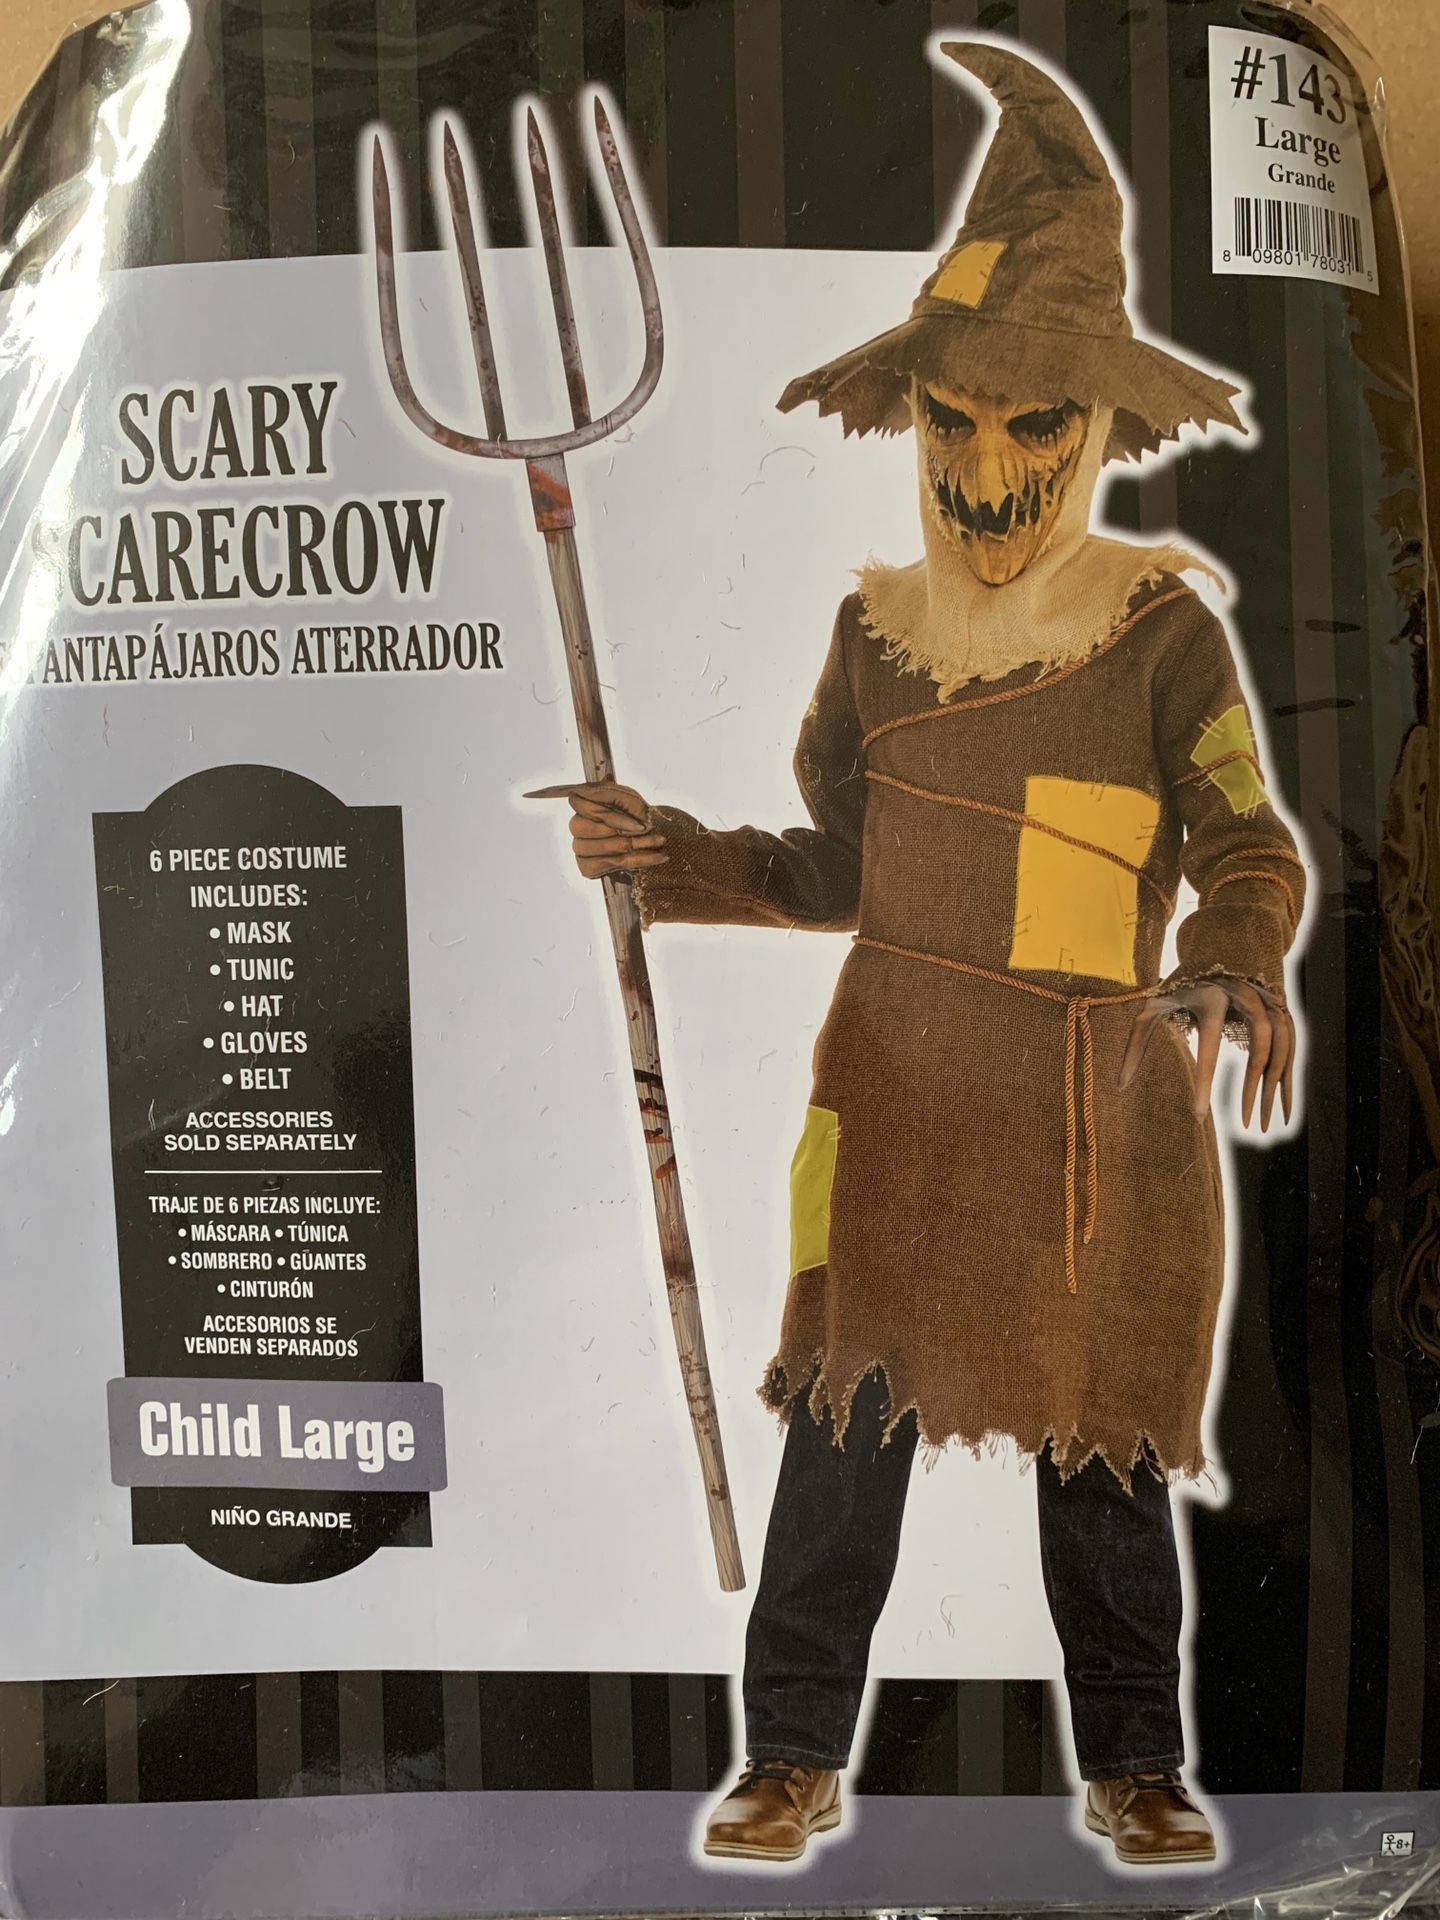 Scary Scarecrow Halloween Costume (Available in L & XL)